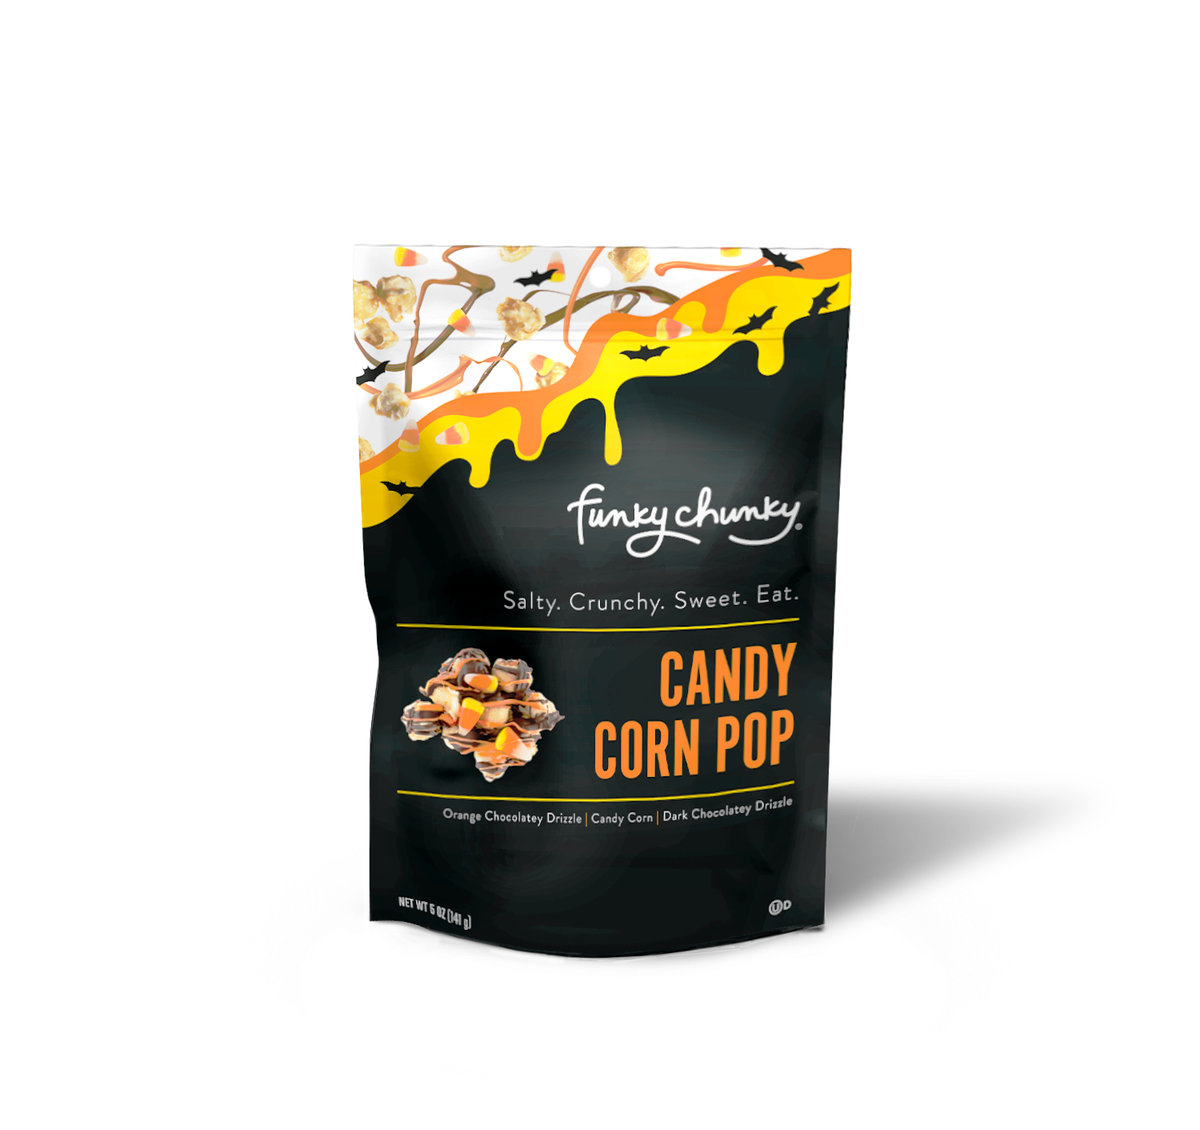 NEW Candy Corn Pop (5 oz - 6 pack) – Funky Chunky